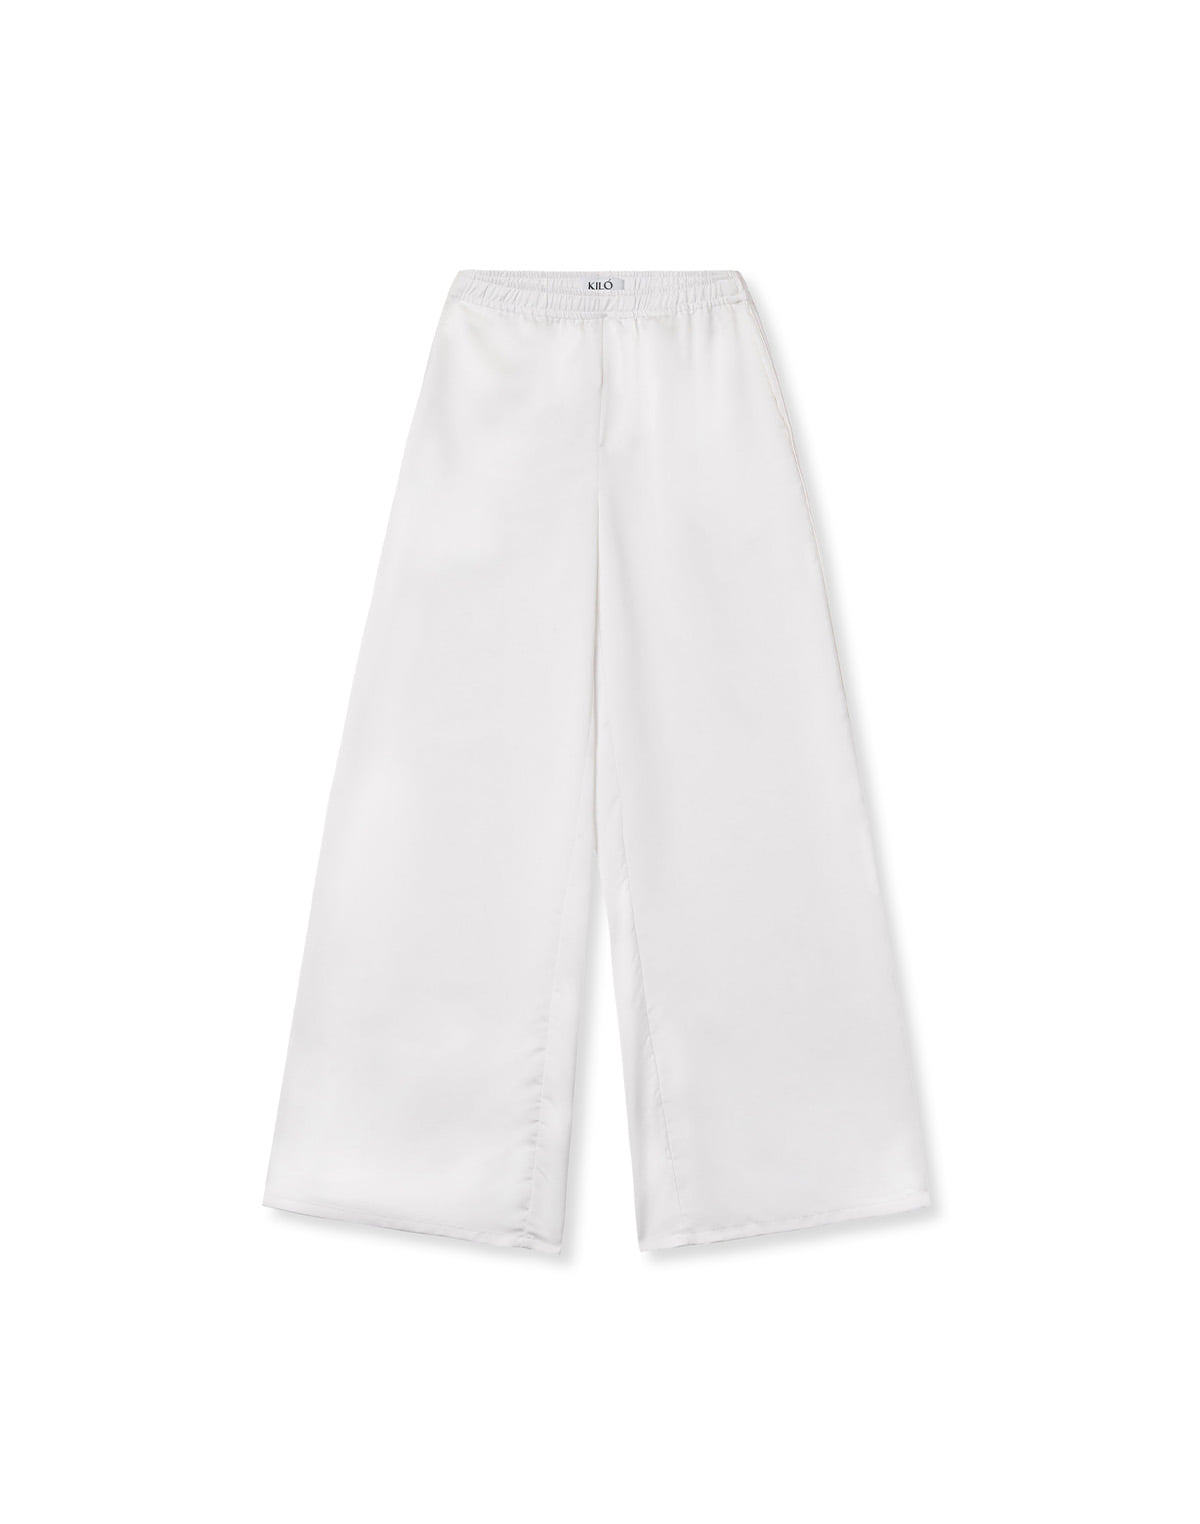 WIDE SATIN TRACK PANTS (WHITE)